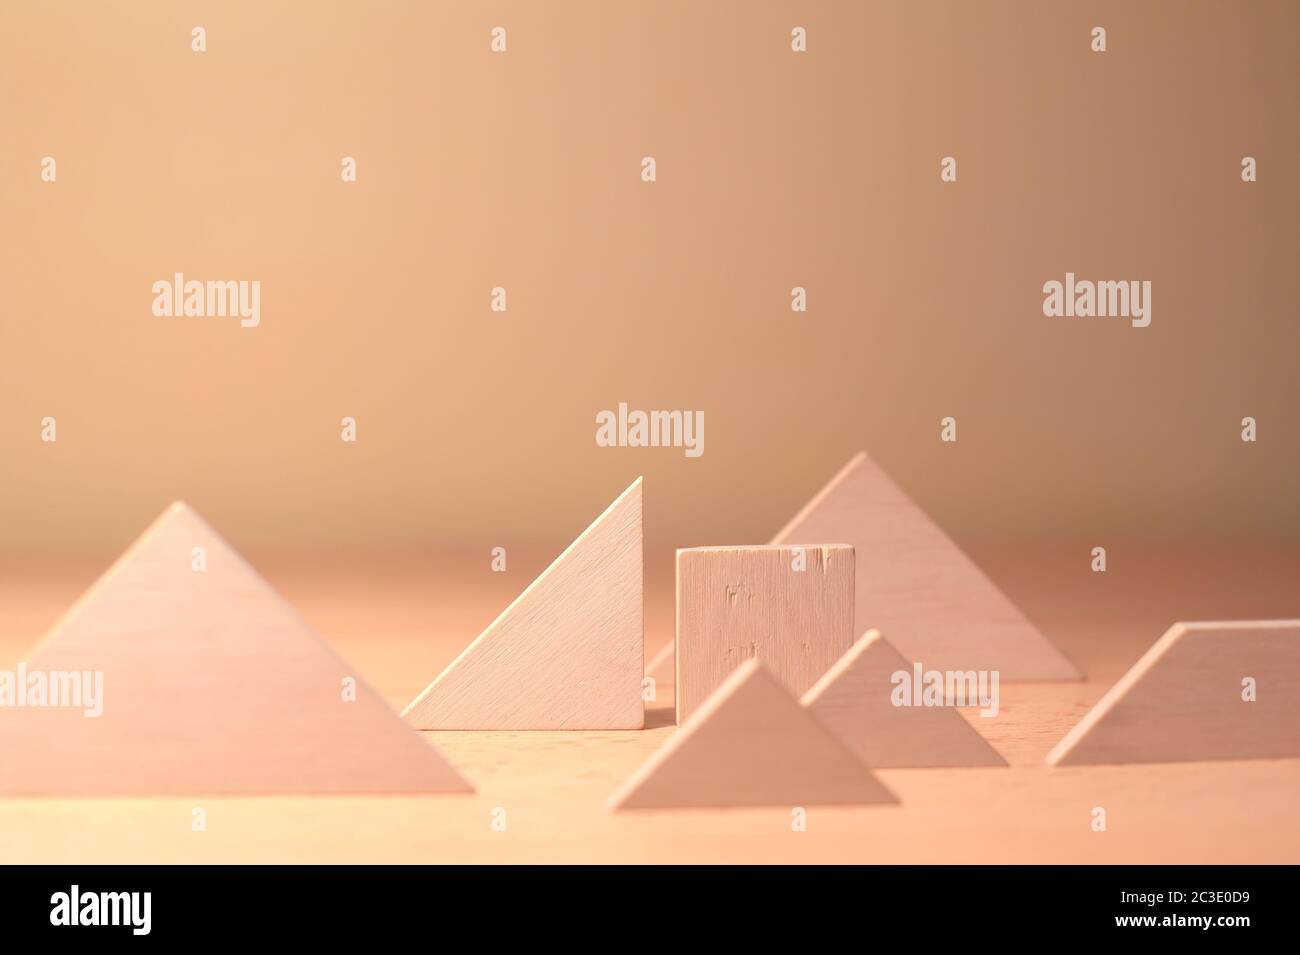 Composition of various geometrical objects - square, triangle - on wooden desk. Shallow focus, cream tint. Stock Photo